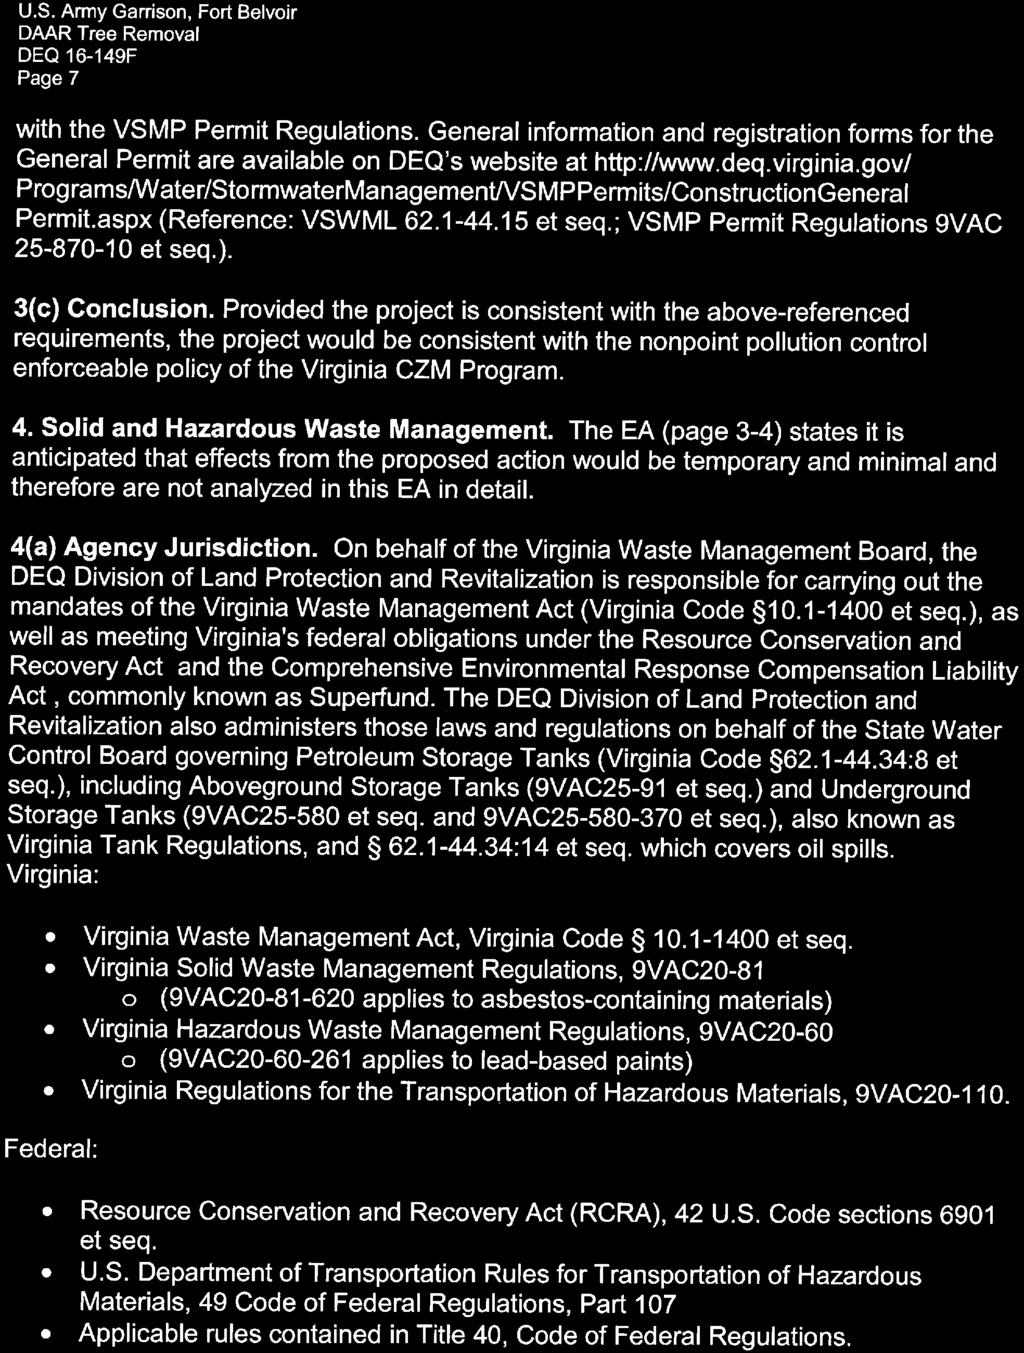 U.S. Army Garrison, Fort Belvoir DAAR Tree Removal DEQ 16-149F Page 7 with the VSMP Permit Regulations.